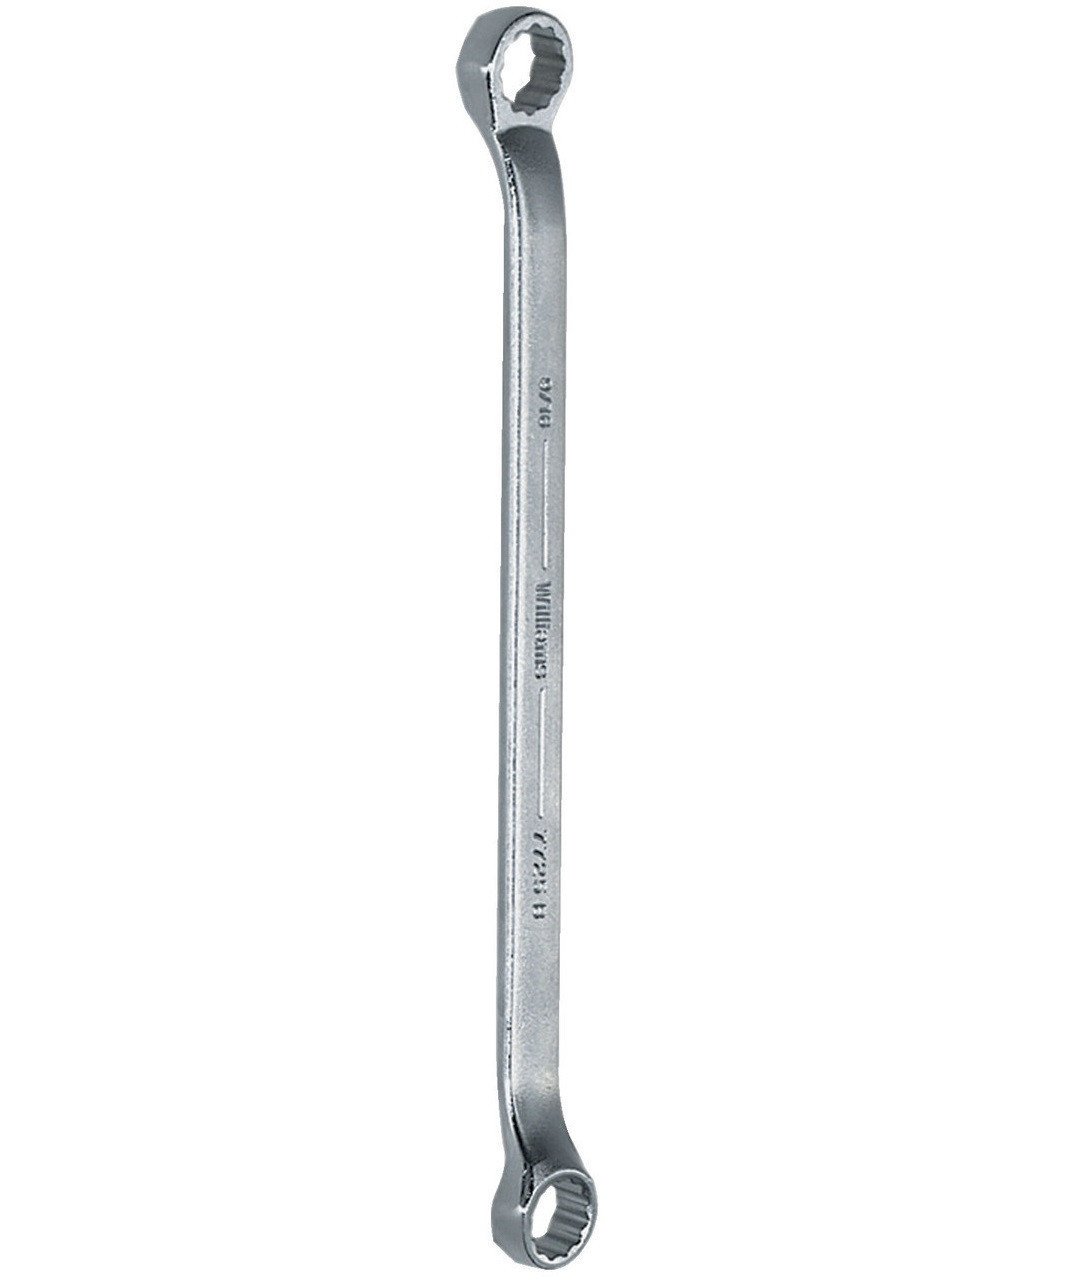 12x14MM Williams Satin Chrome Double Head 10 Degree Offset Box End Wrench 12 PT - JHWBWM-1214